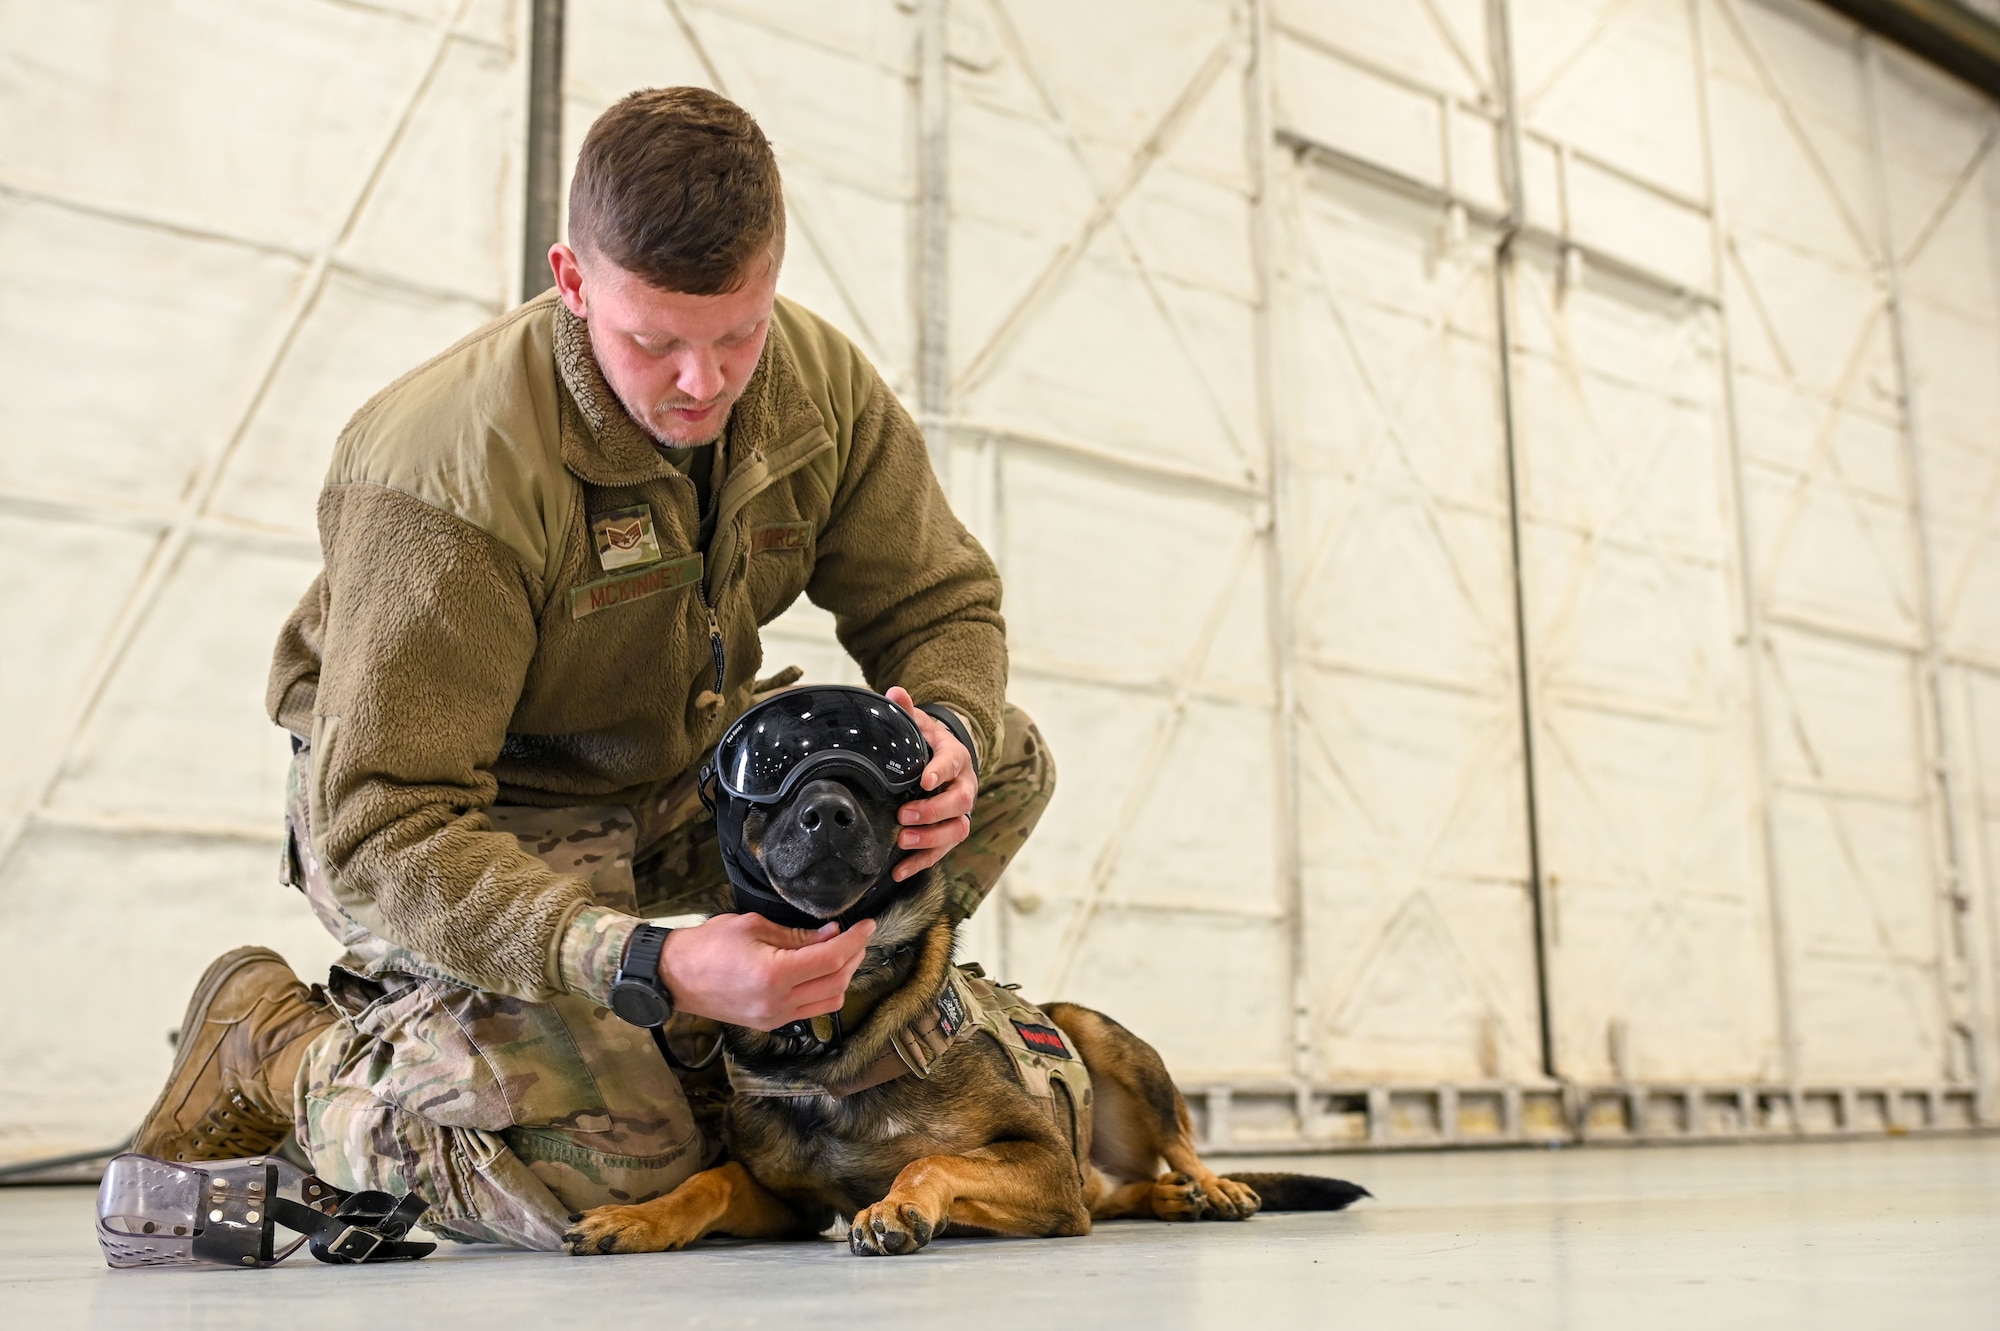 U.S. Air Force Staff Sgt. Ian McKinney, 92nd Security Forces Squadron Military Working Dog handler, prepares his dog Sipos for UH-1N Huey training at Fairchild Air Force Base, Washington, Oct. 25, 2022. MWD's complete this training to ensure they are calm and experienced to ride in a helicopter overseas or in a deployed environment. (U.S. Air Force photo by Airman 1st Class Morgan Dailey)